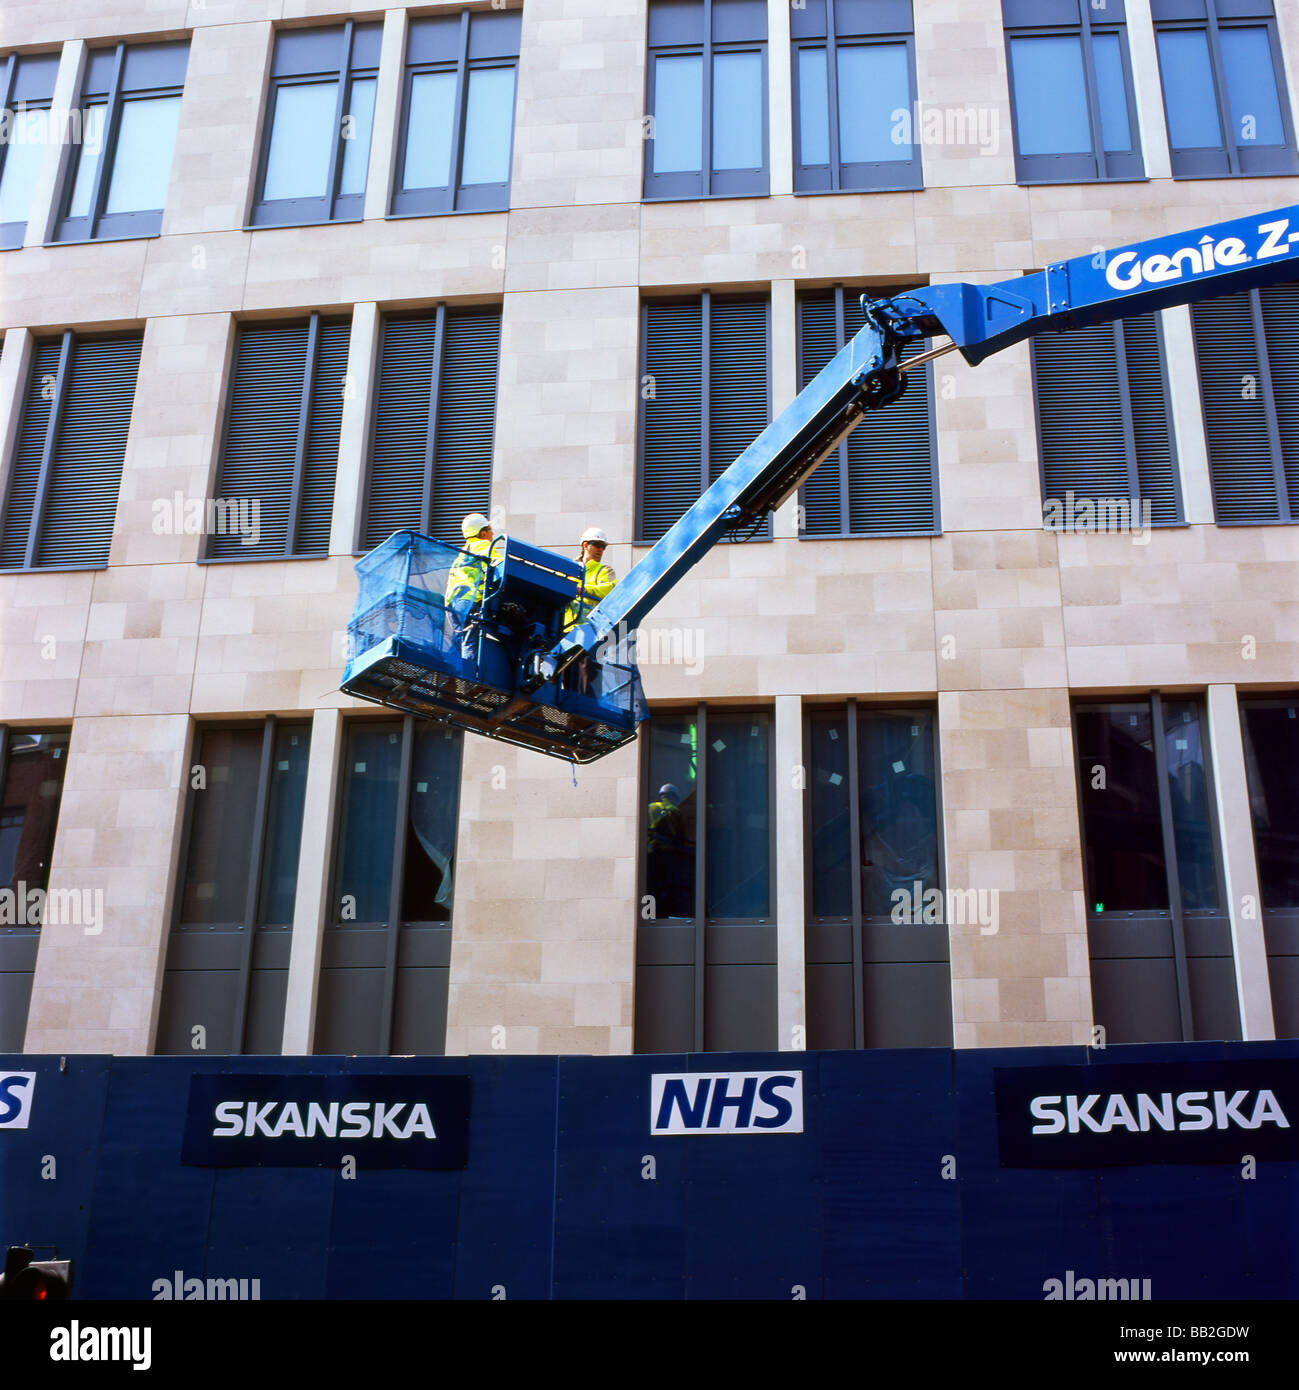 St Barts NHS Cancer Care construction site, Skanska workers in crane lift  and sign London England UK  KATHY DEWITT Stock Photo